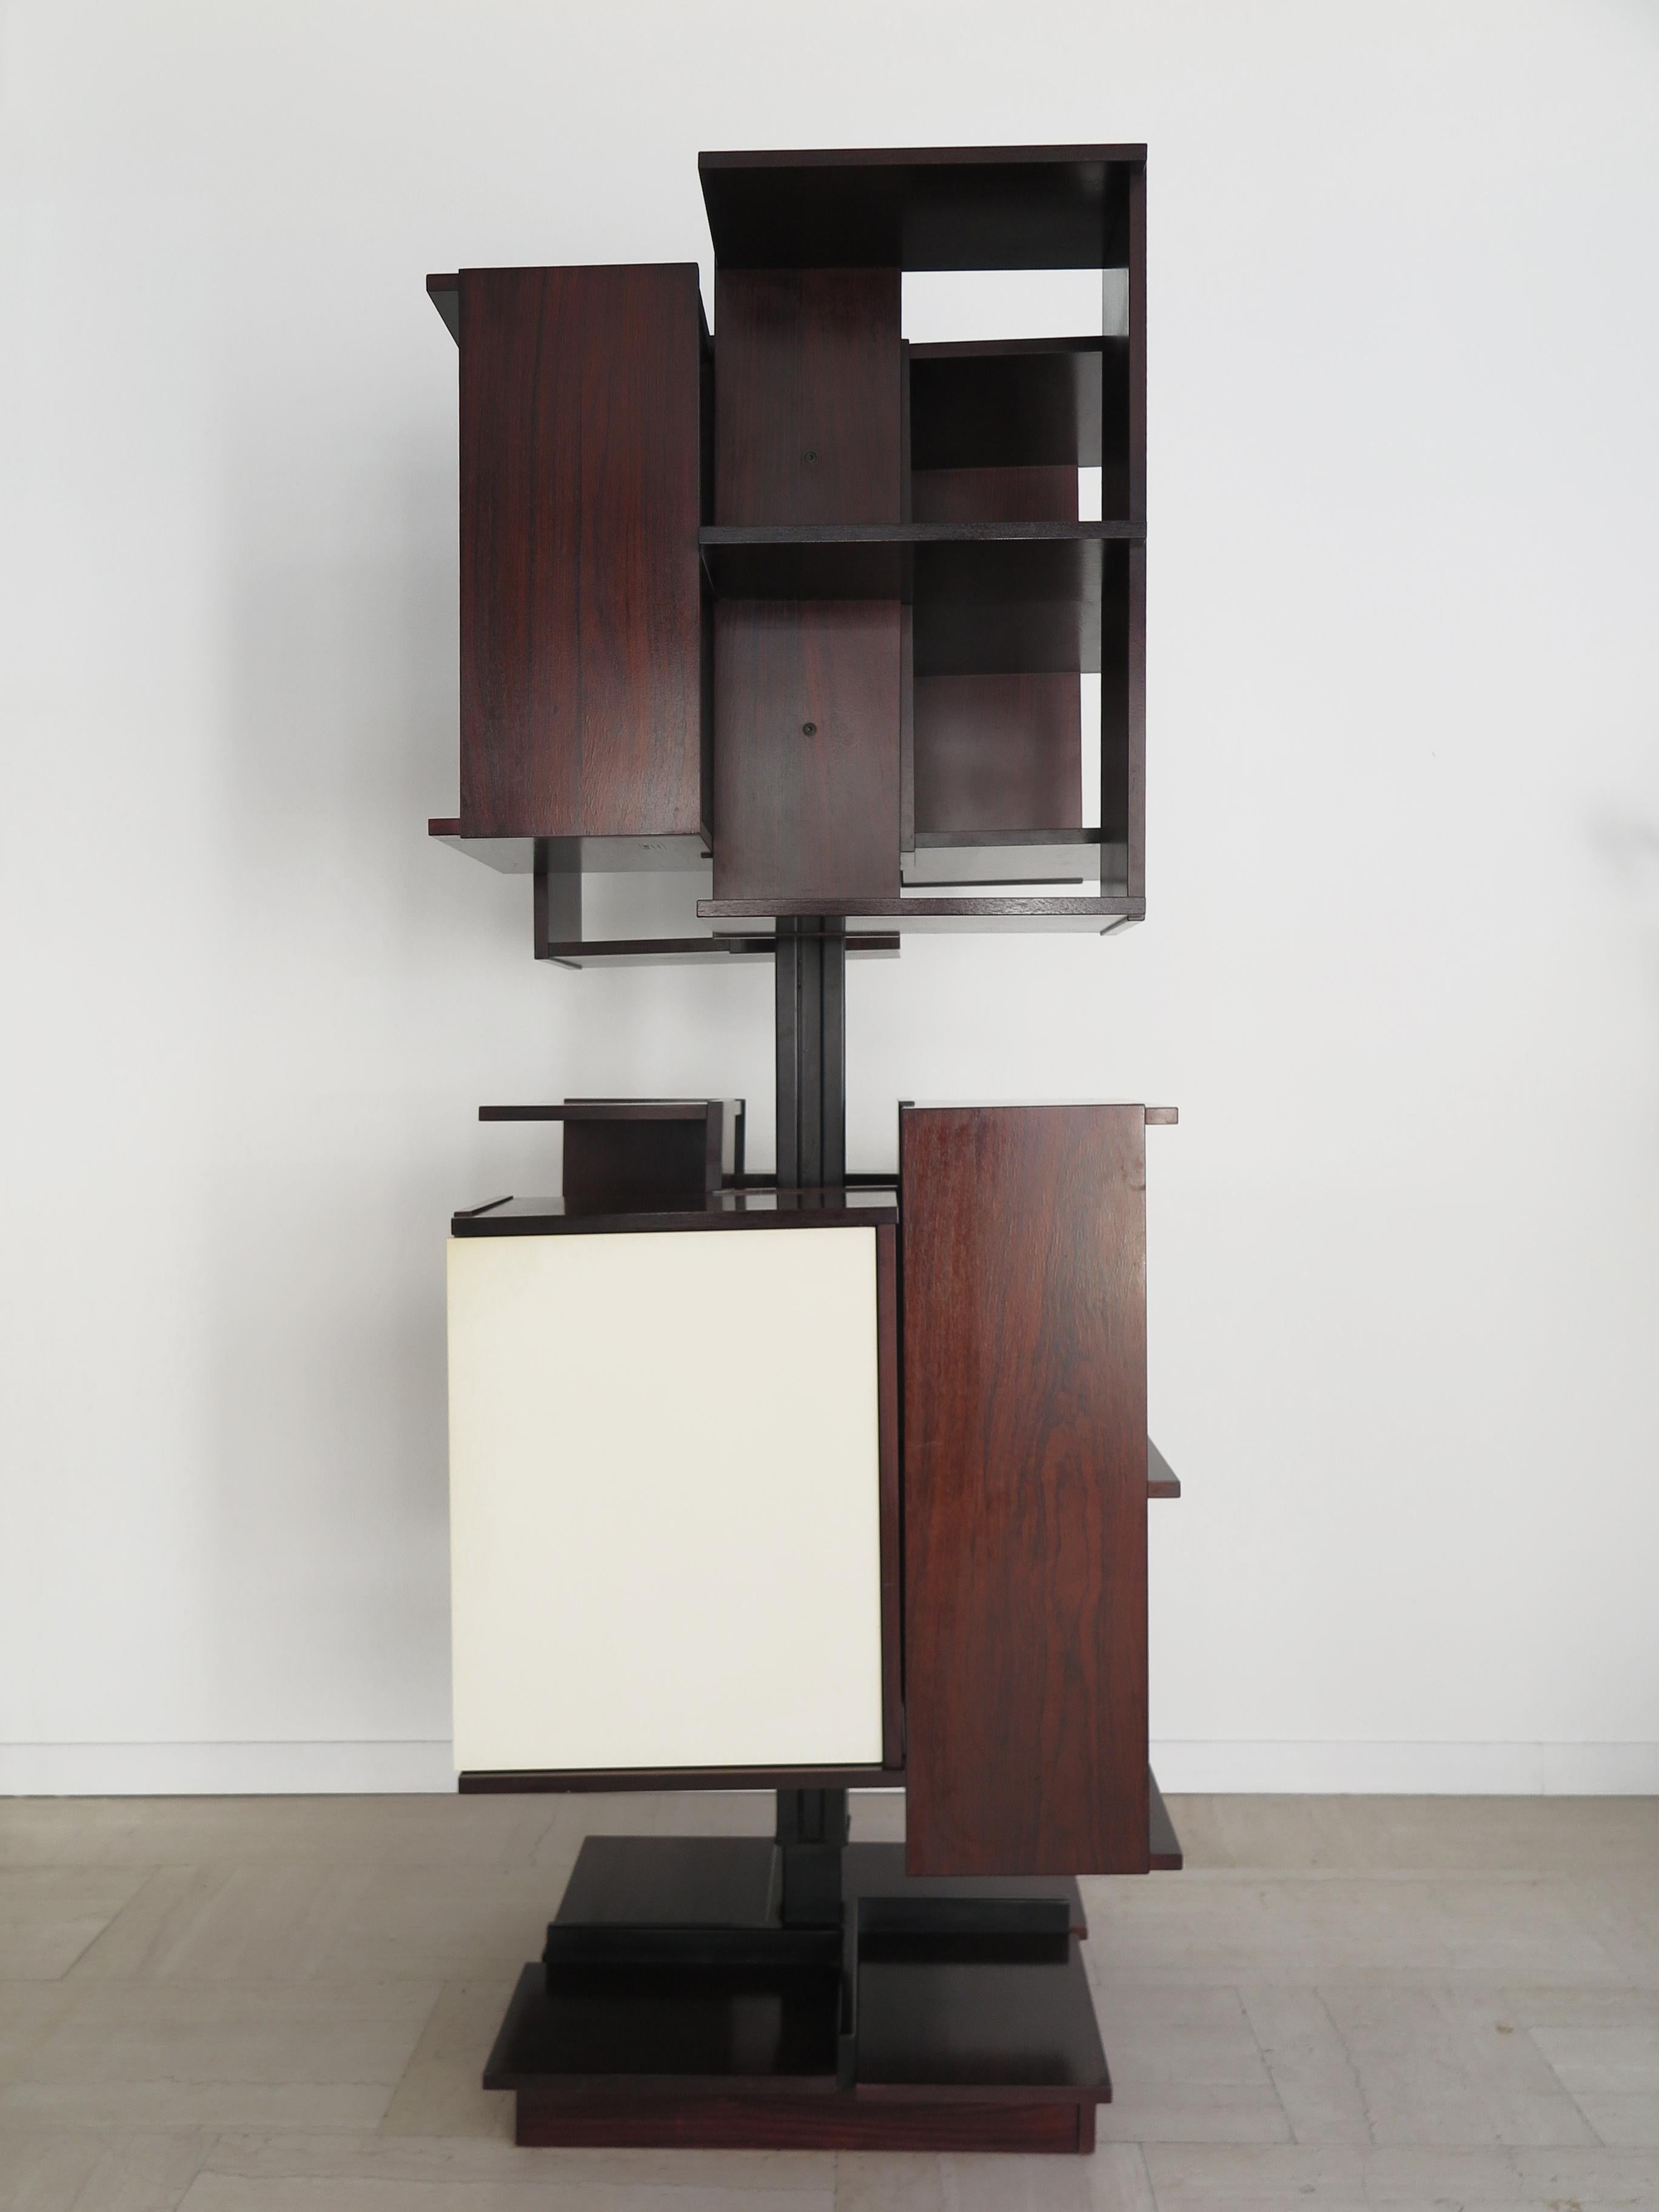 Italian Mid-Century Modern design revolving bookcase model “Centro” designed by Claudio Salocchi (Milano 1934 - Milano 2012) and produced by Sormani Arosio with central revolving structure in black enameled metal and wooden storage units, one of